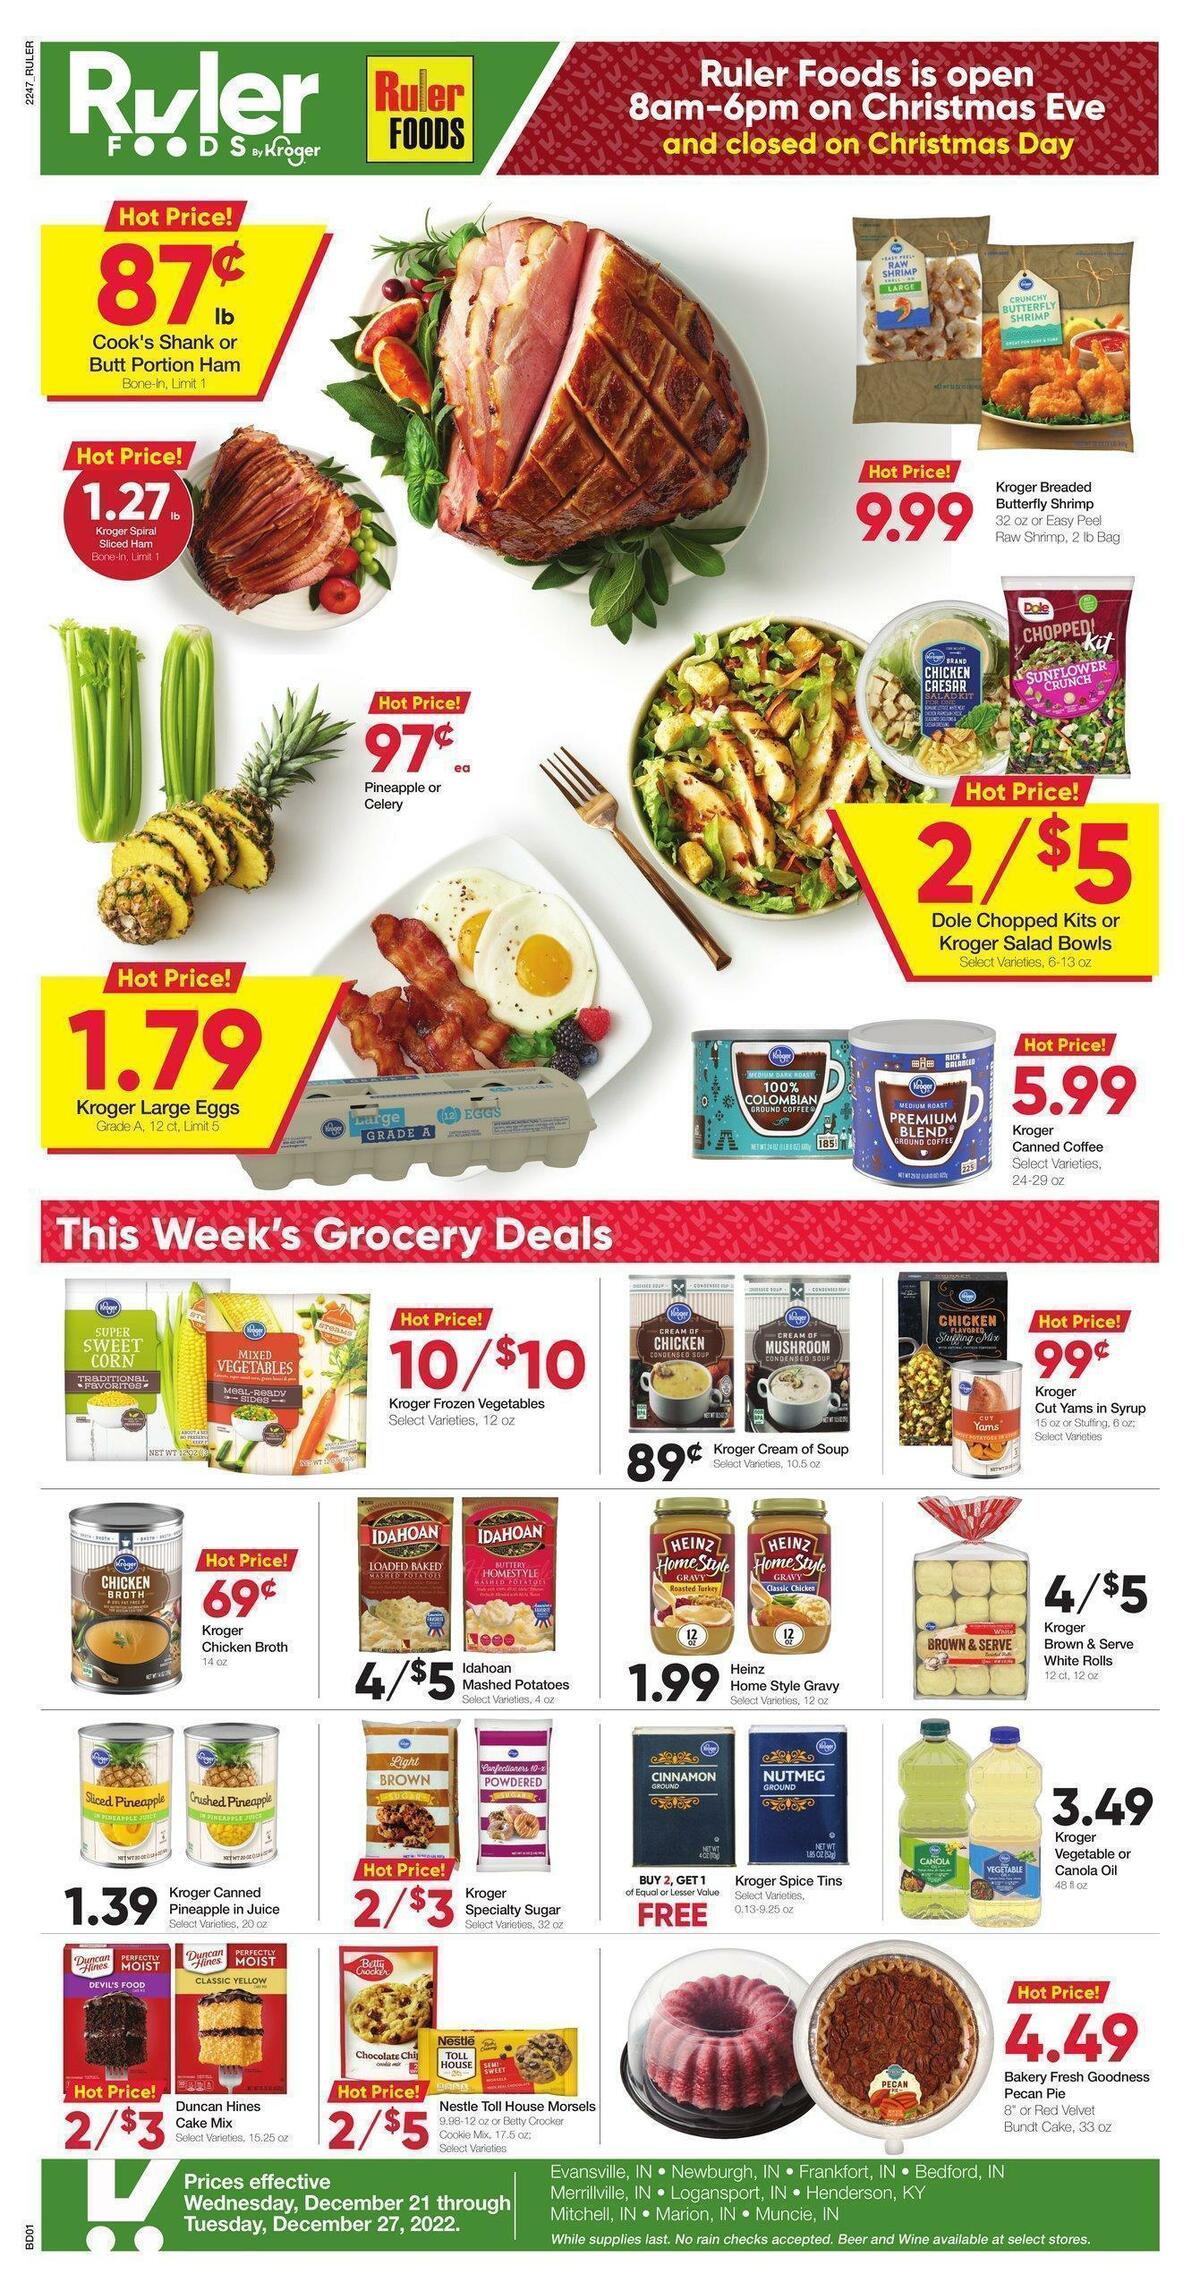 Ruler Foods Weekly Ad from December 21